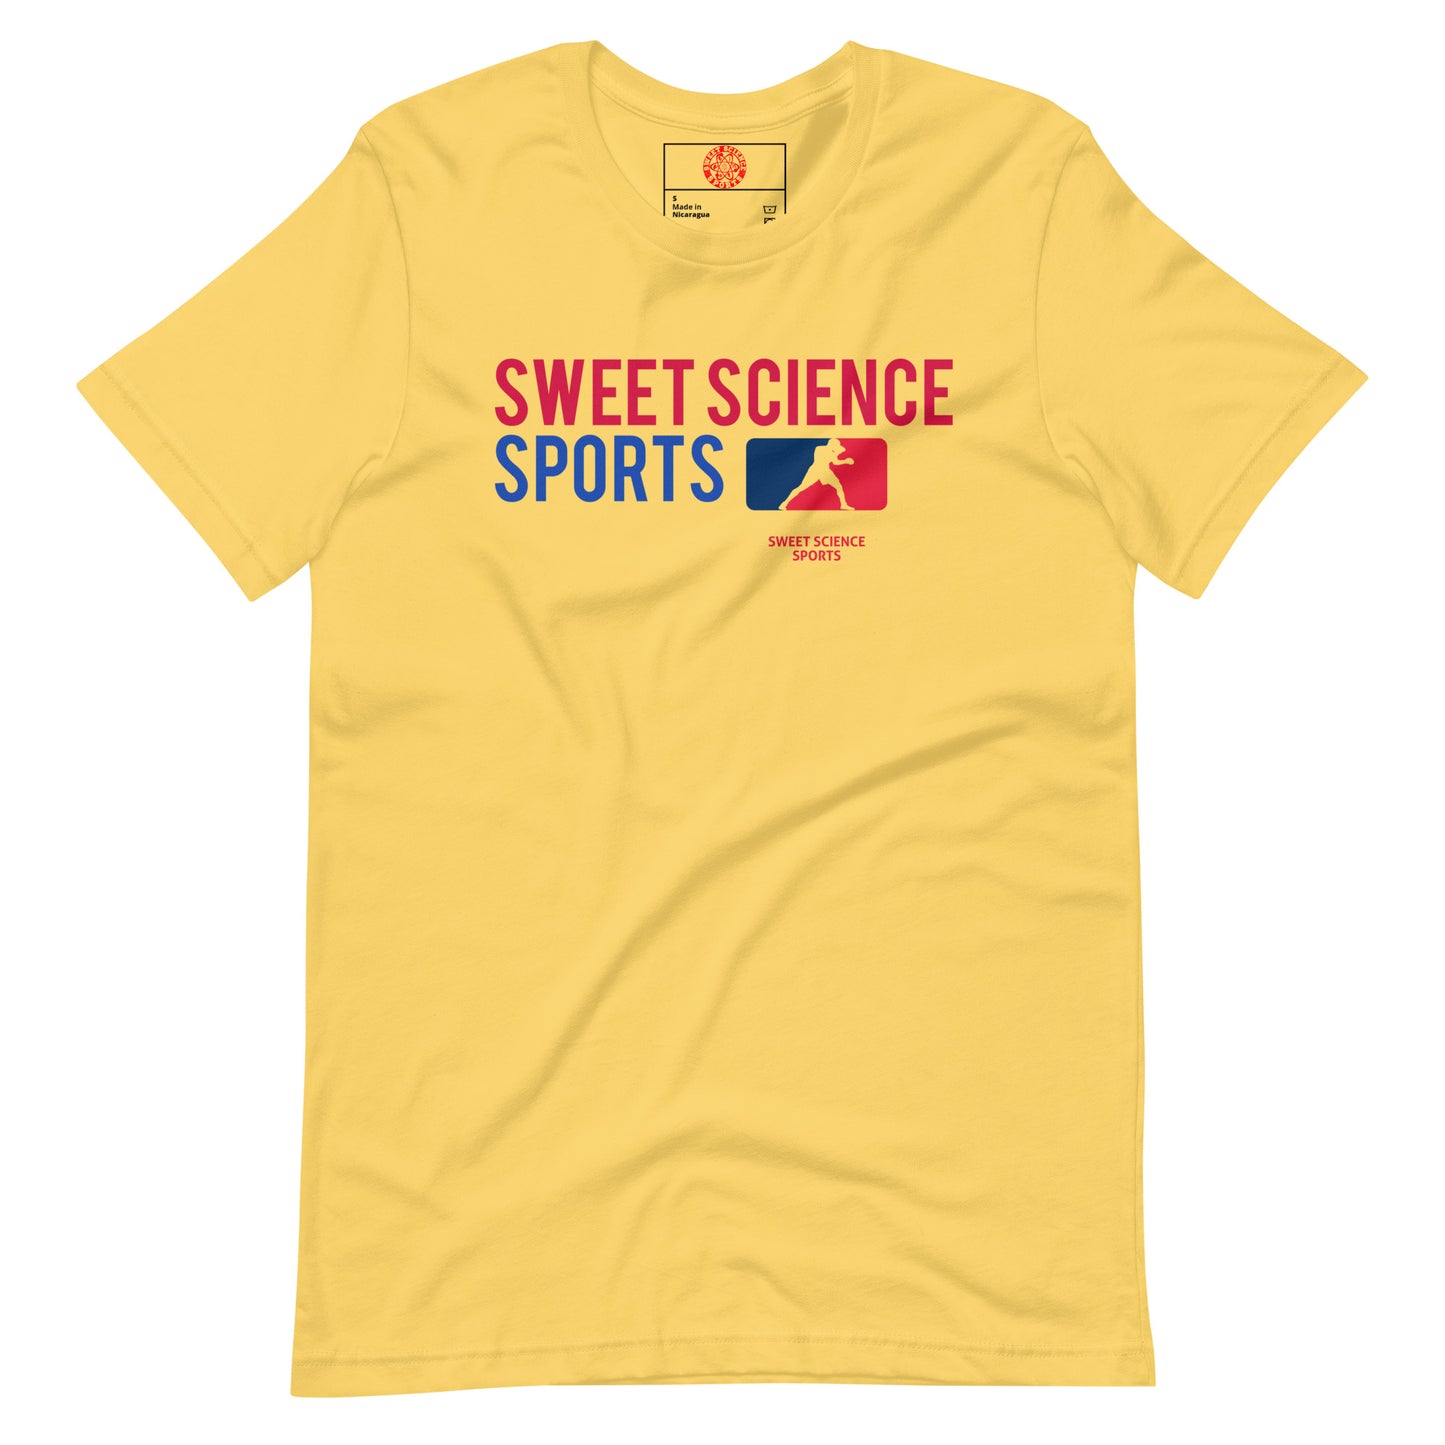 Sweet Science Sports text  t-shirt